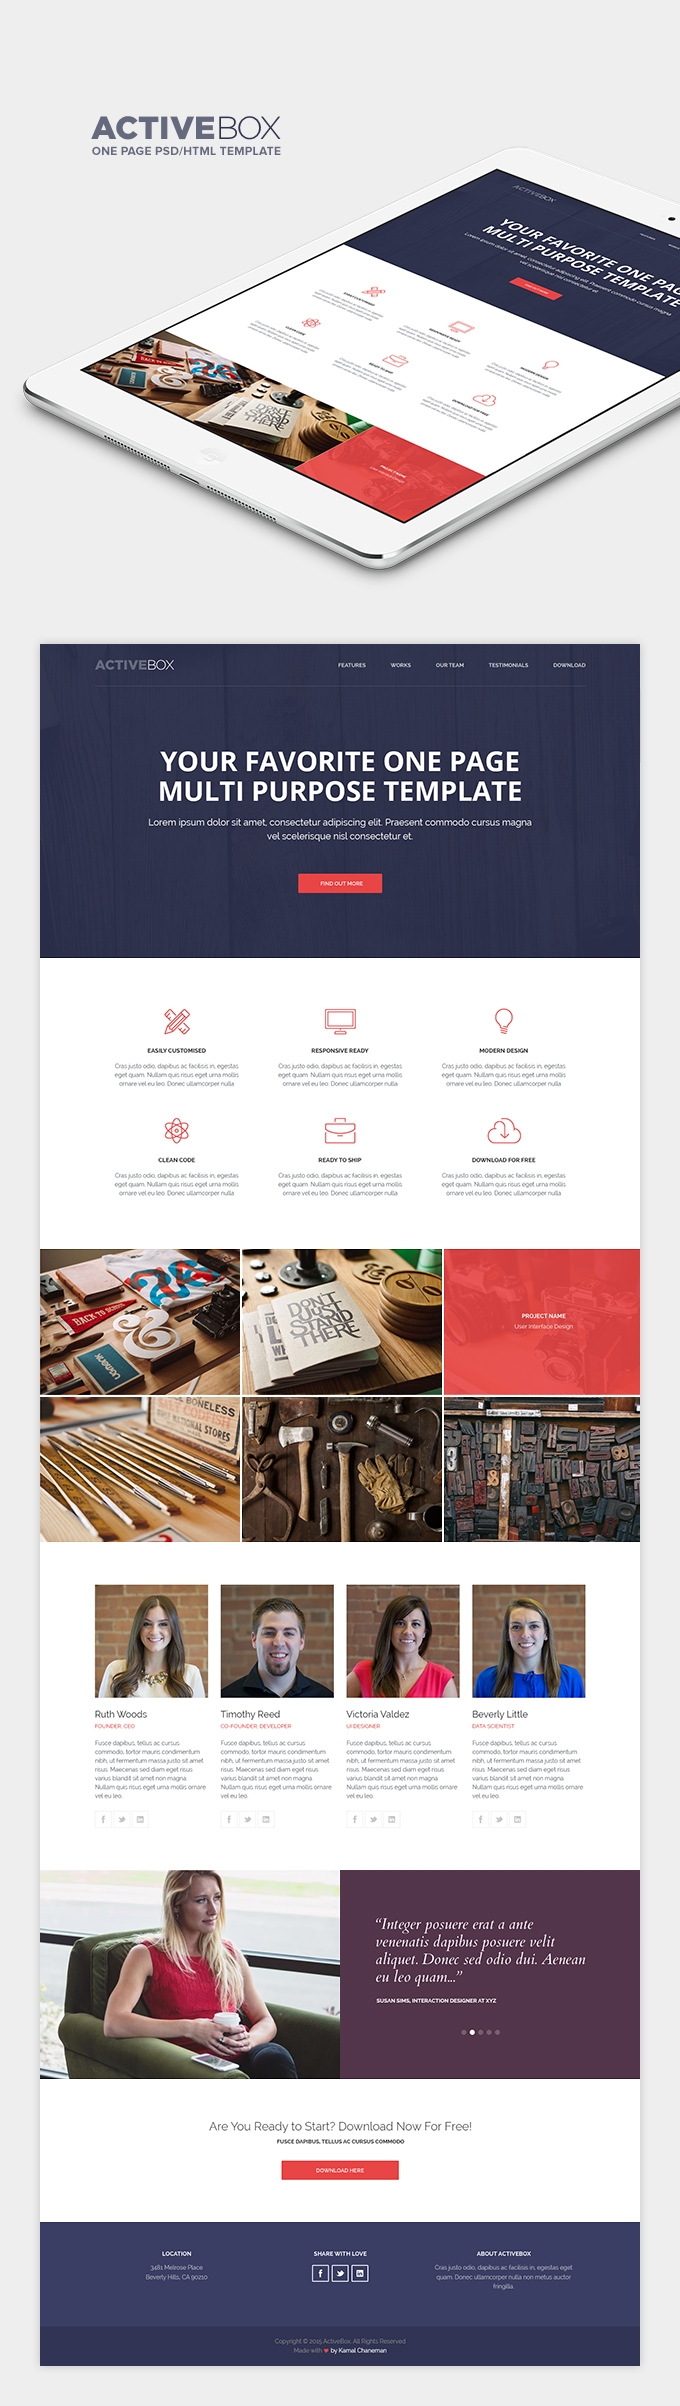 Responsive one-page HTML template: free download